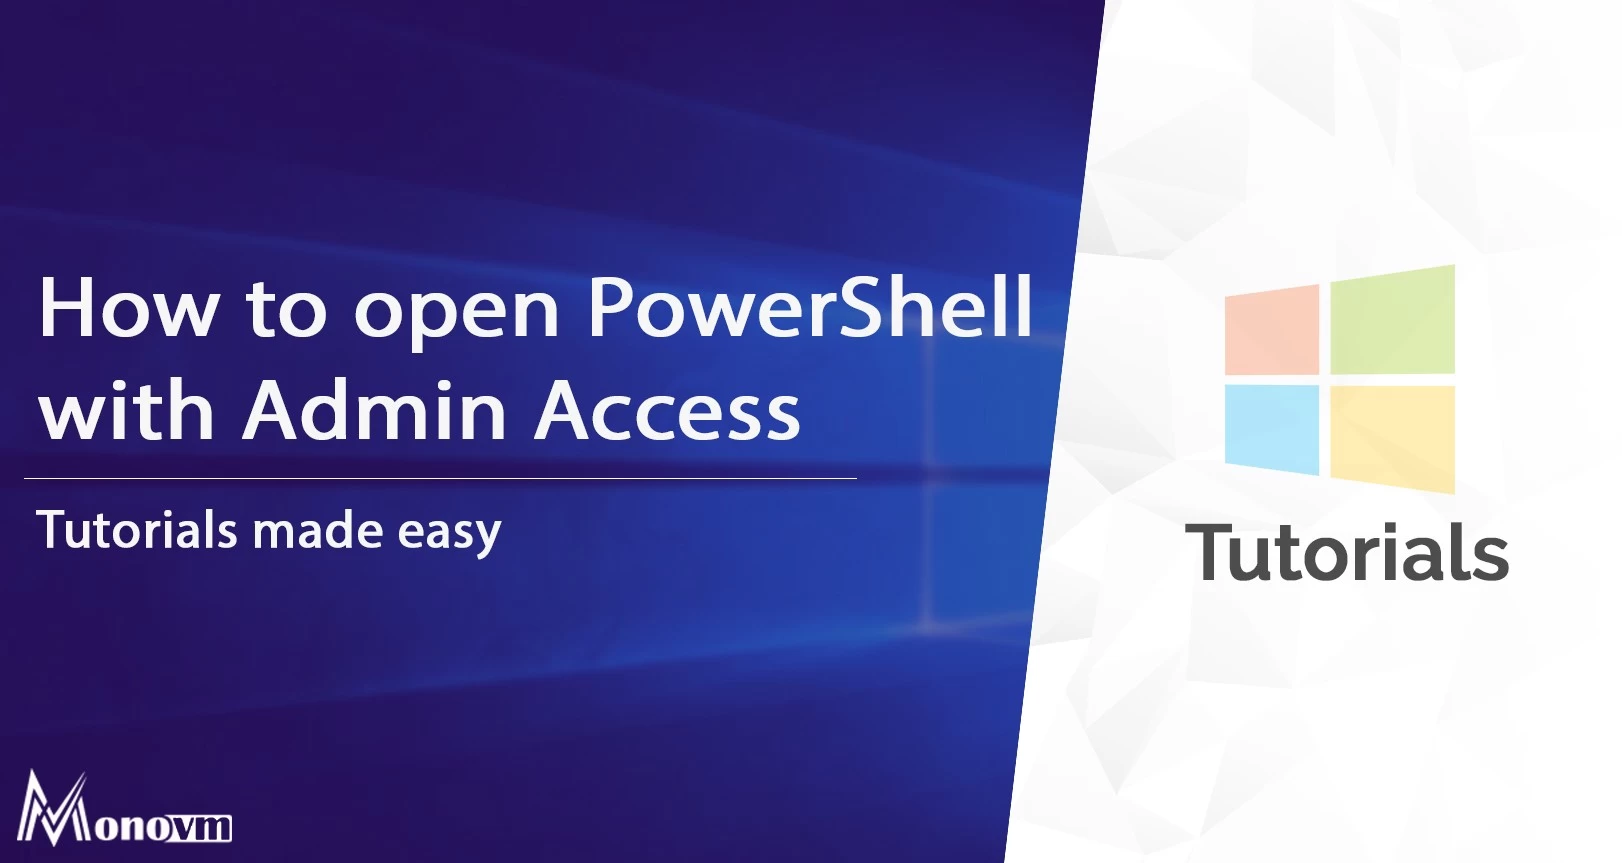 How to Run Powershell as Administrator? [Open Powershell as Admin]